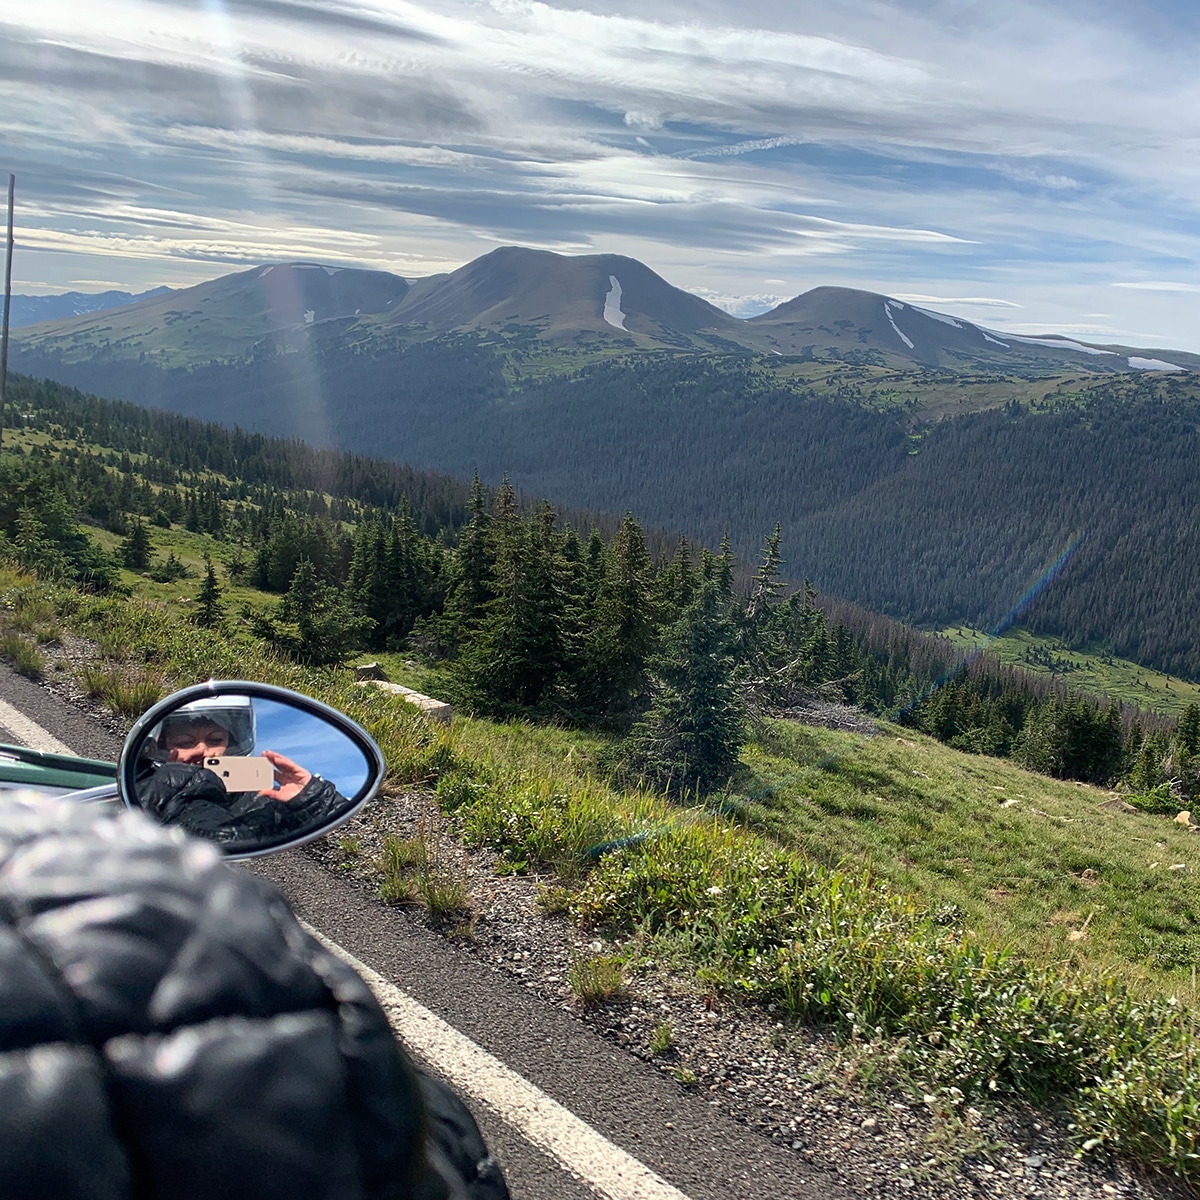 The view from our motorcycle while riding over Trail Ridge Road.